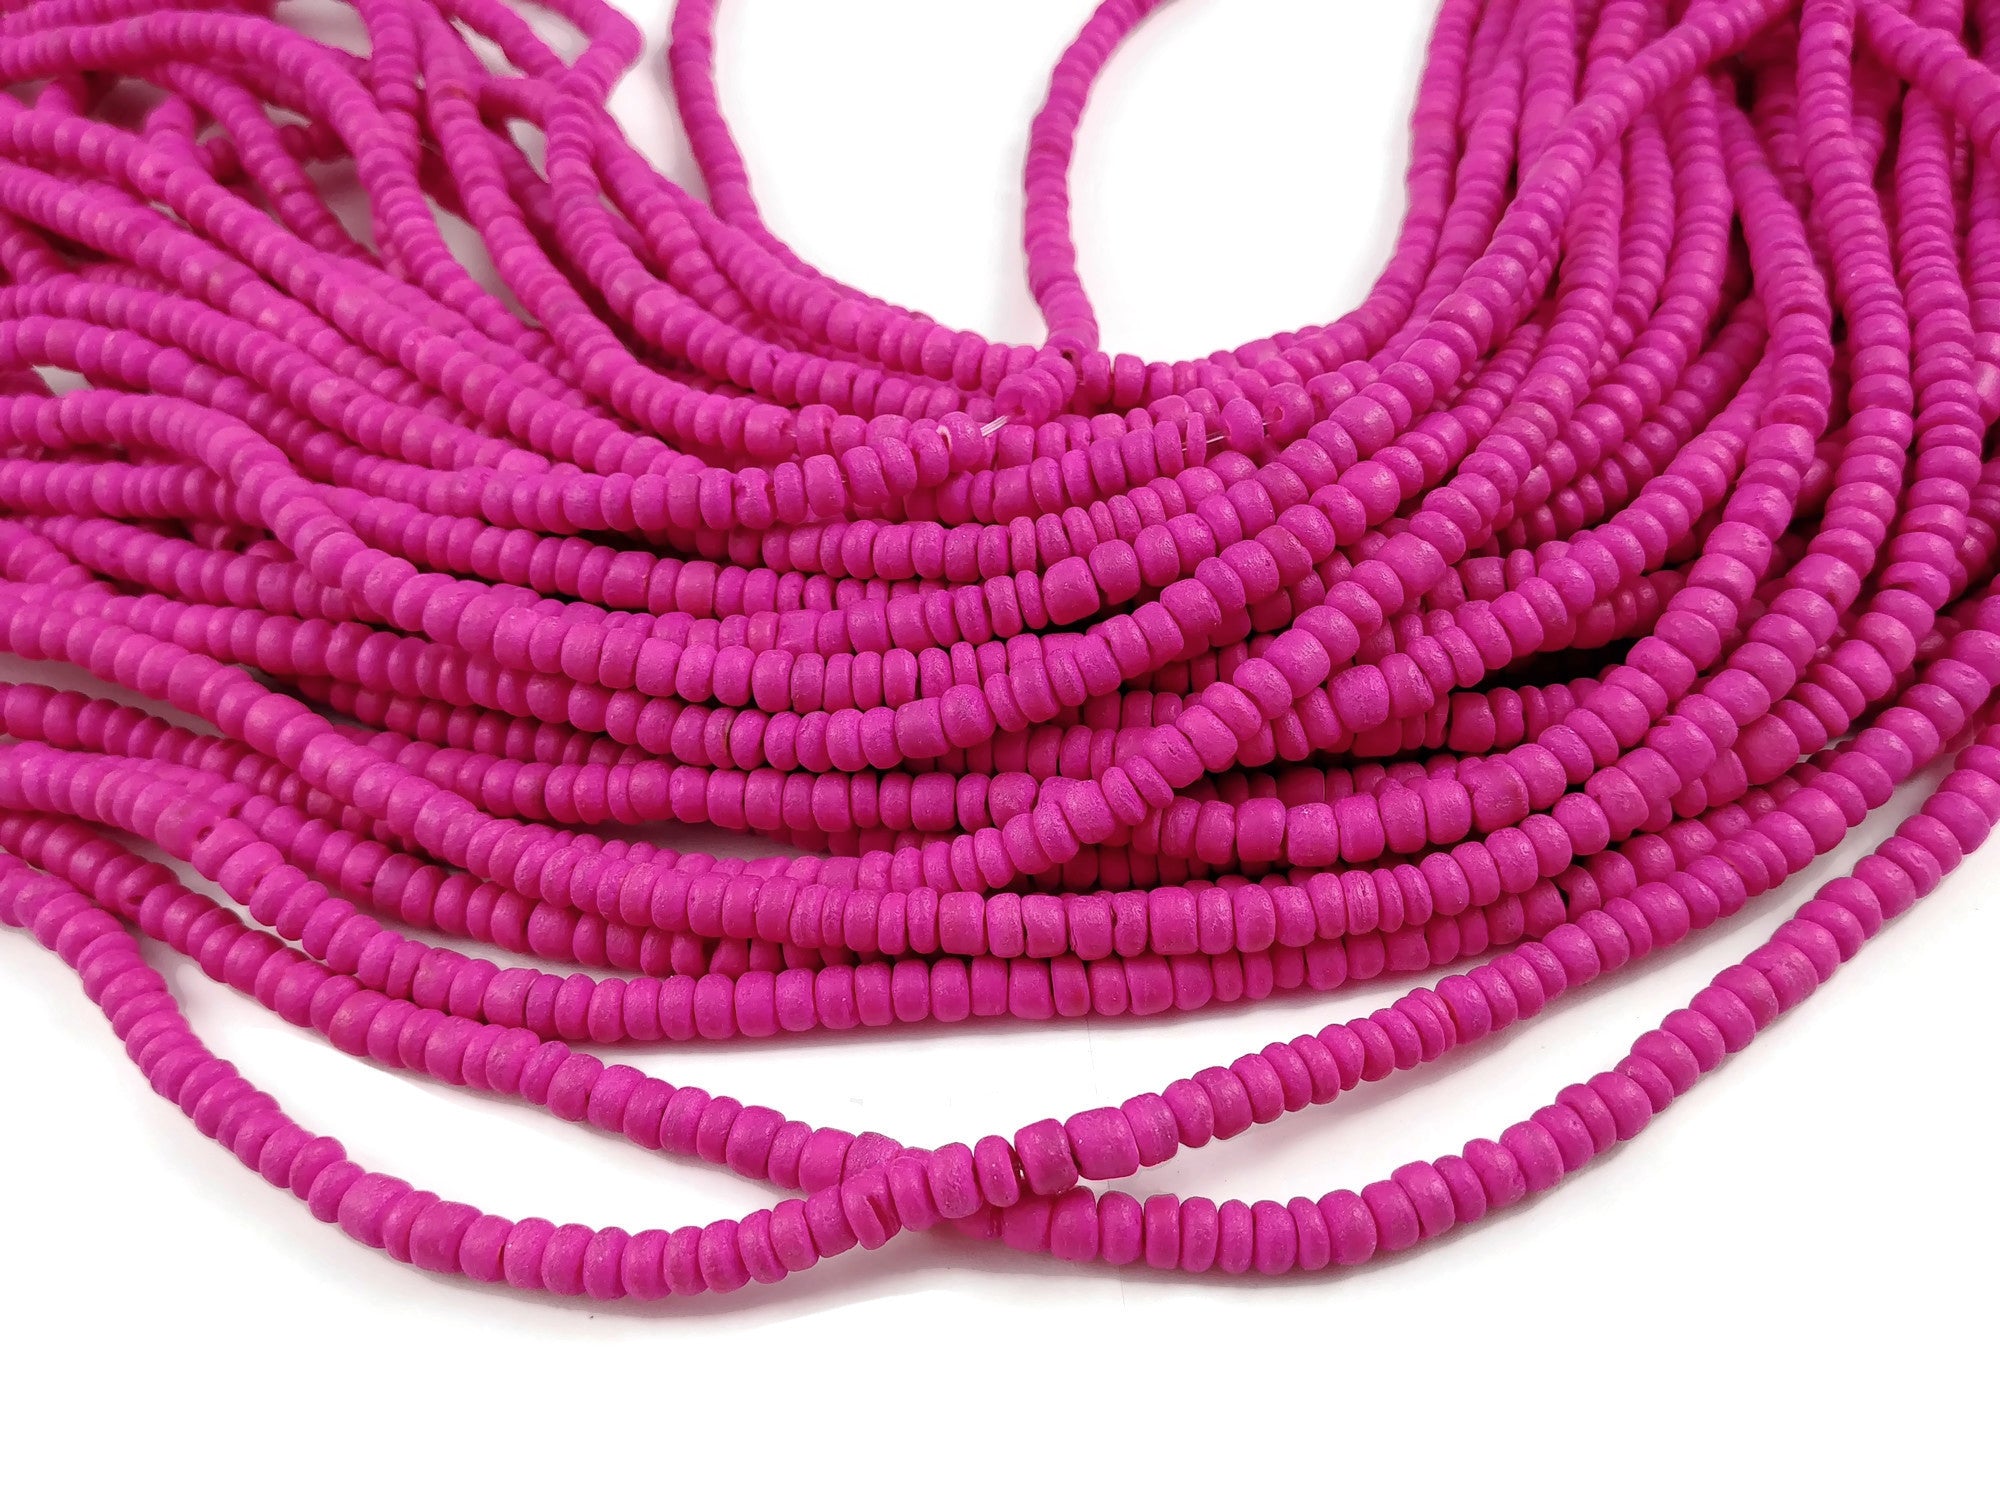 Fushia pink coconut beads - Wooden rondelle disk beads 4-5mm